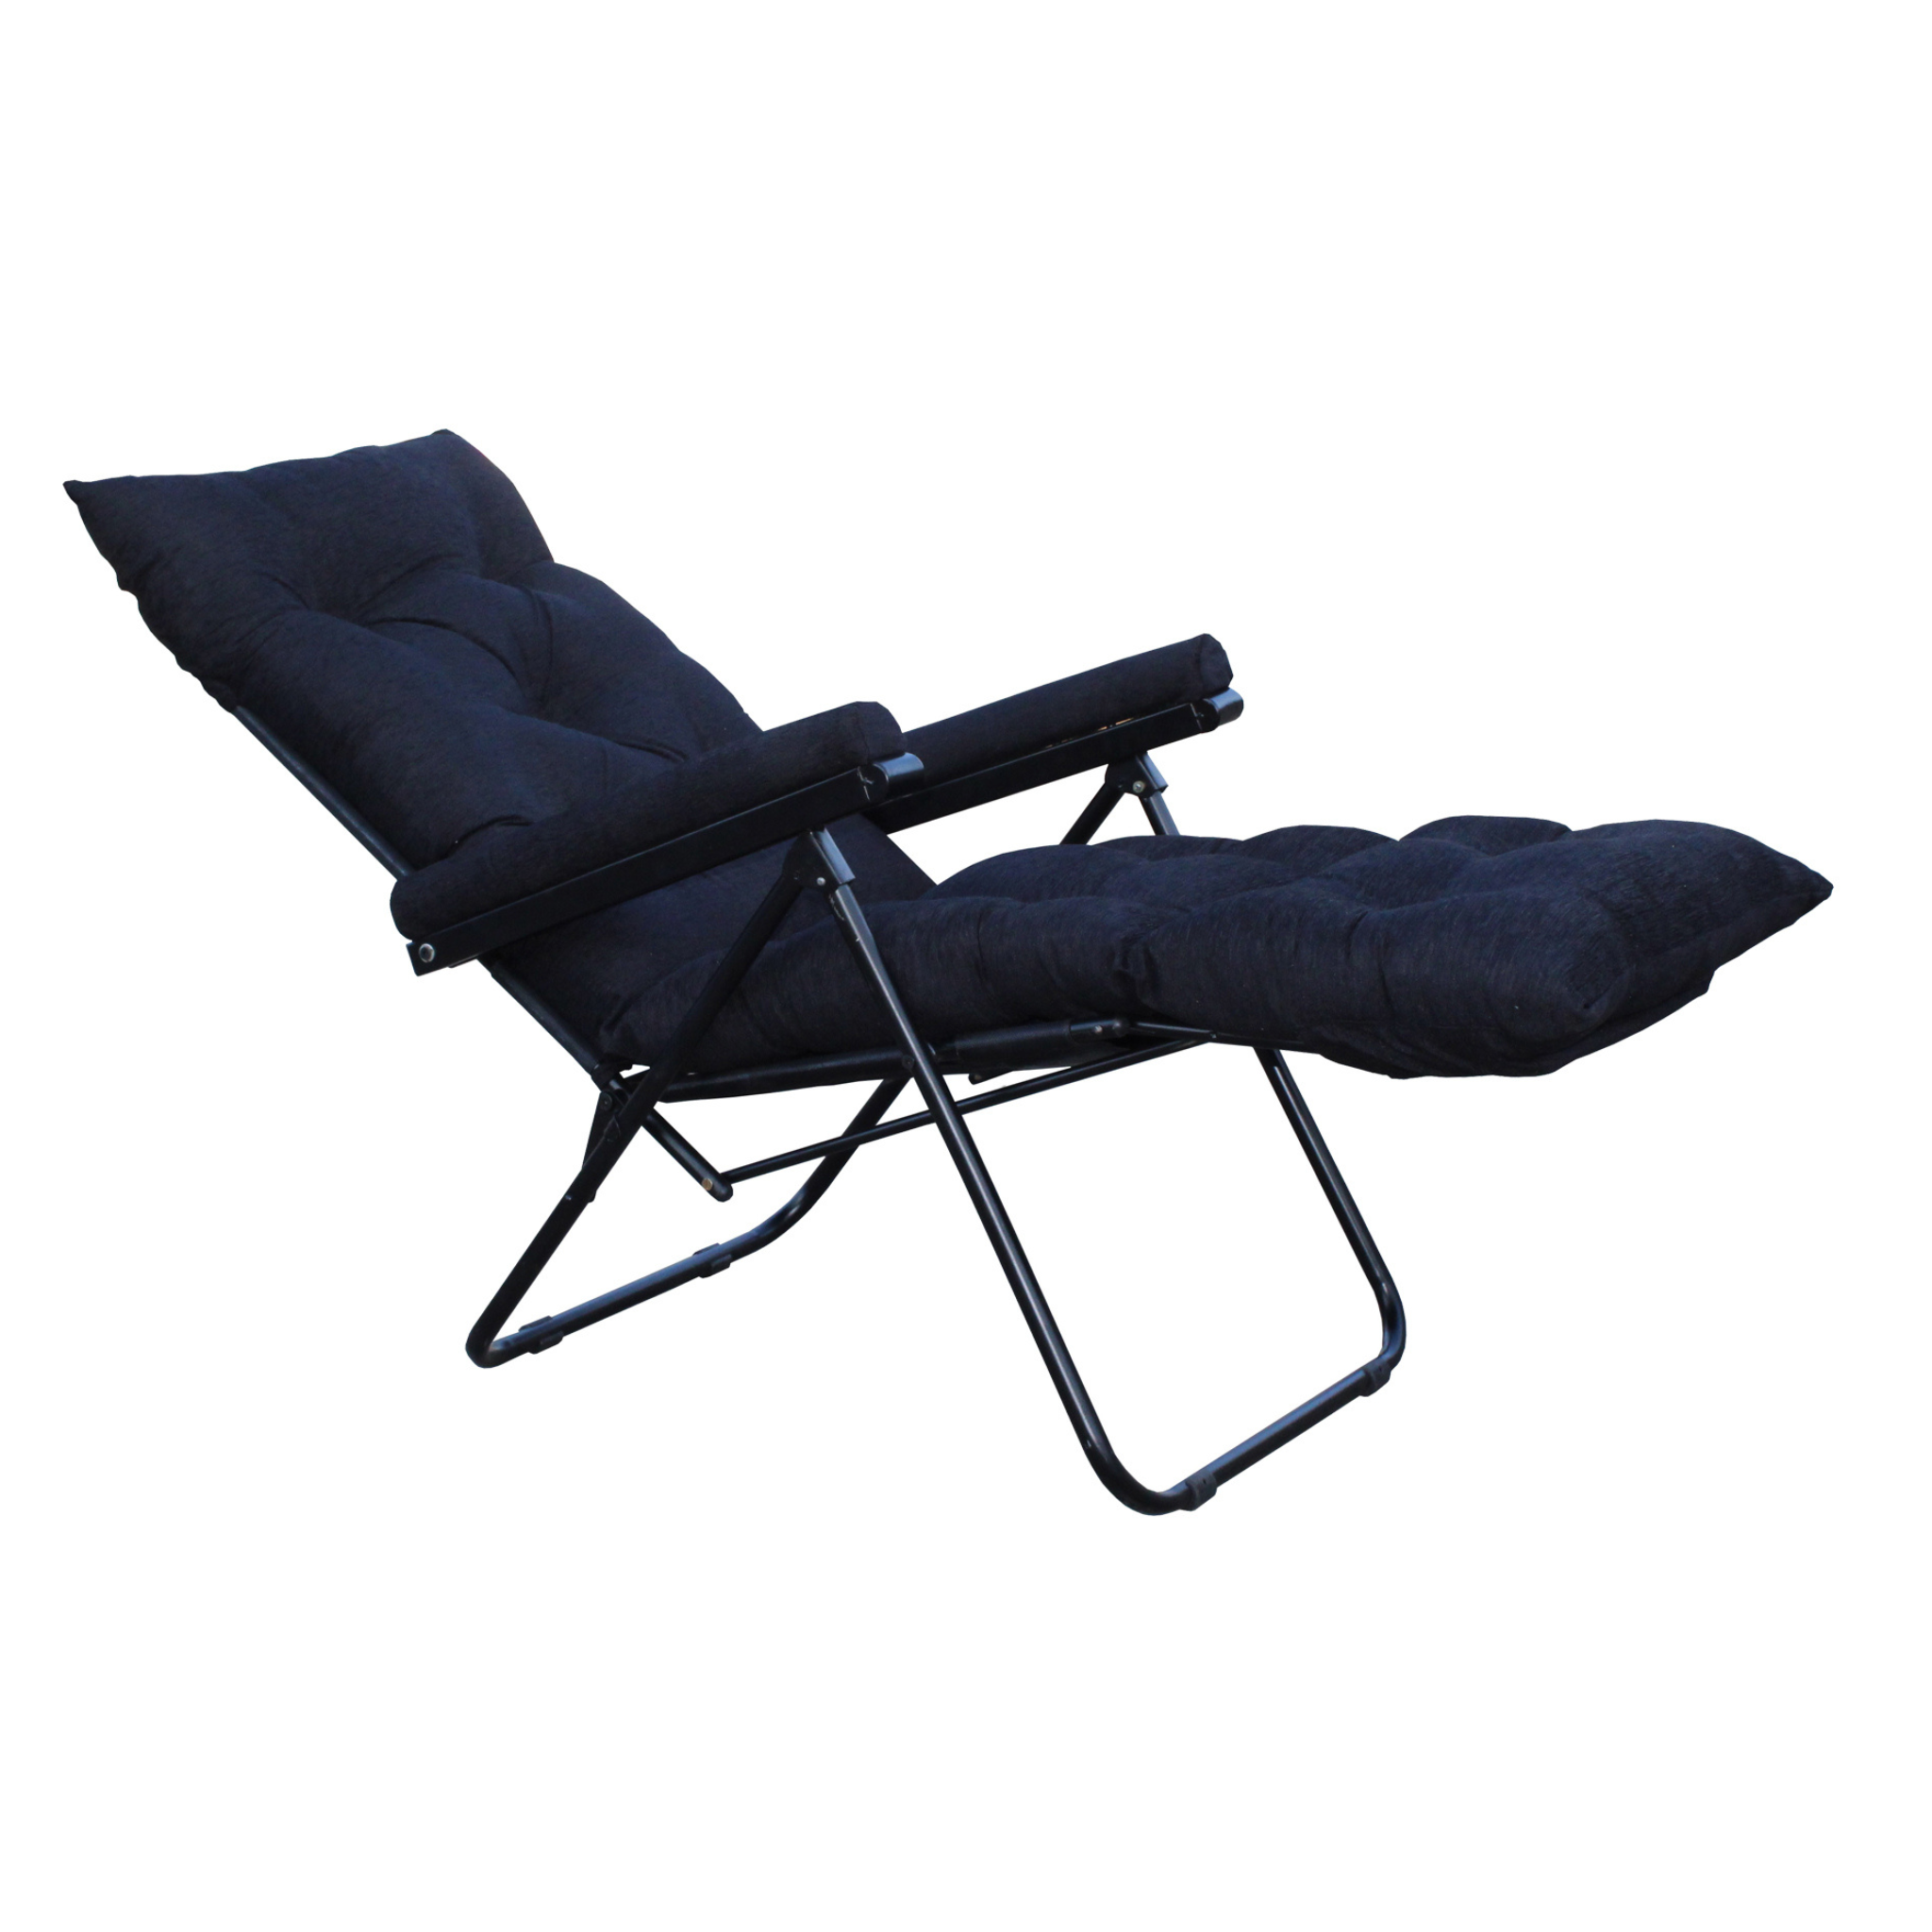 Pulsar 5 Stage Reclining Lazy Easy Chair with Recon Foam